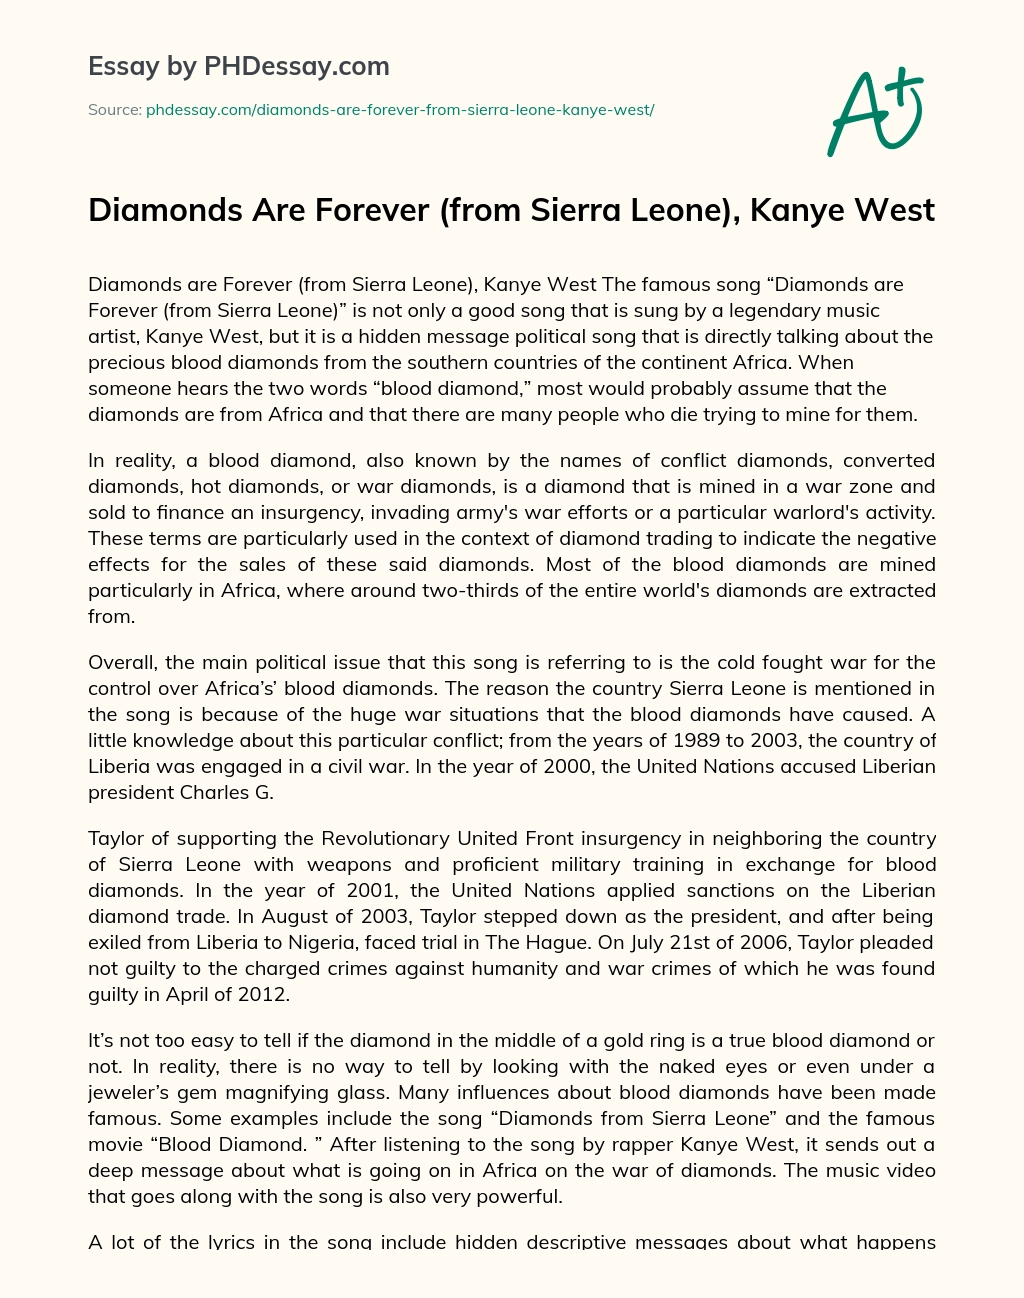 Diamonds Are Forever (from Sierra Leone), Kanye West essay